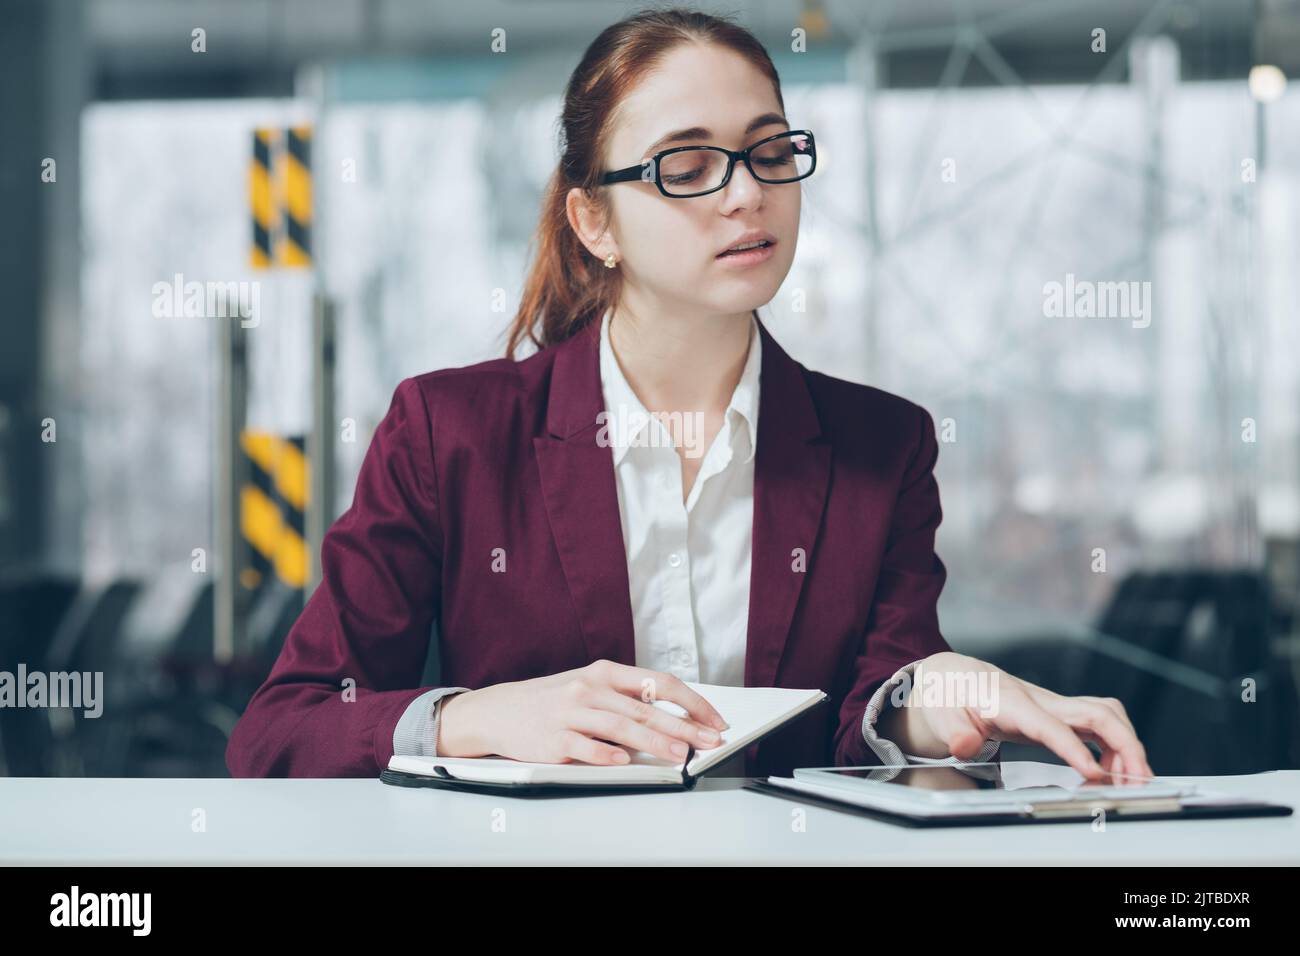 corporate employee work planning woman day planner Stock Photo